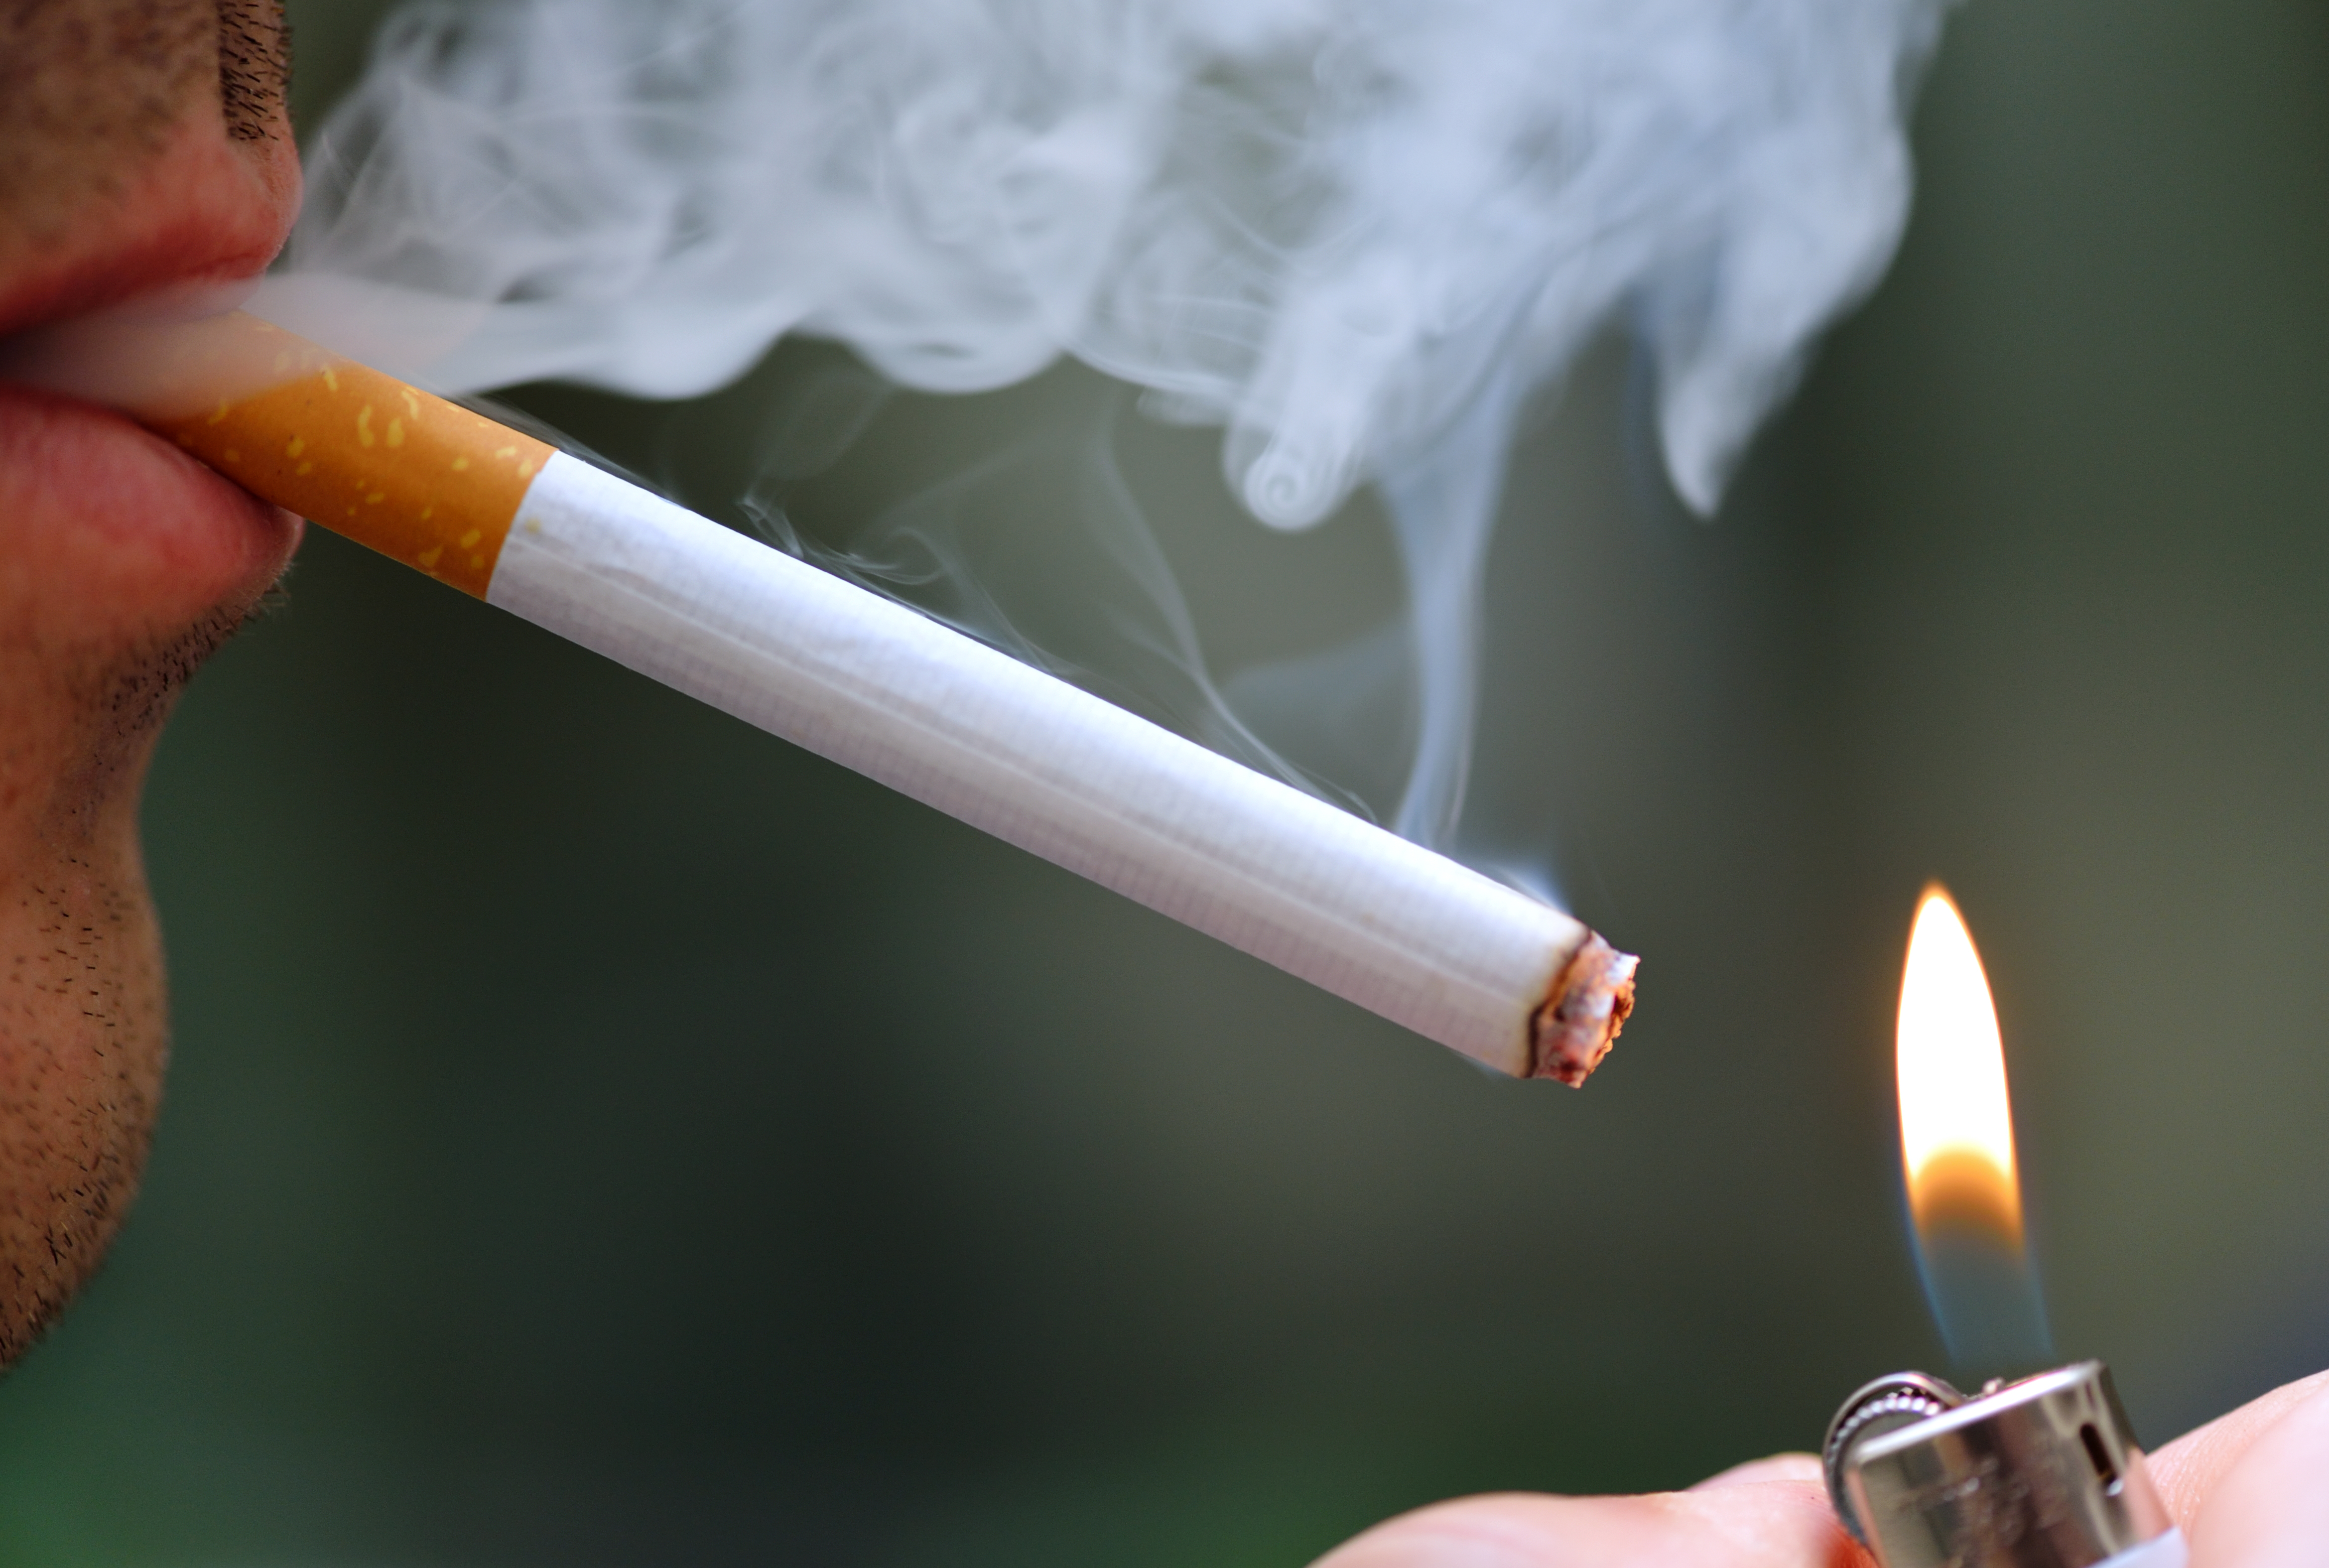 Pleasanton Looks At Expanding Smoking Restrictions To Condos, Townhomes